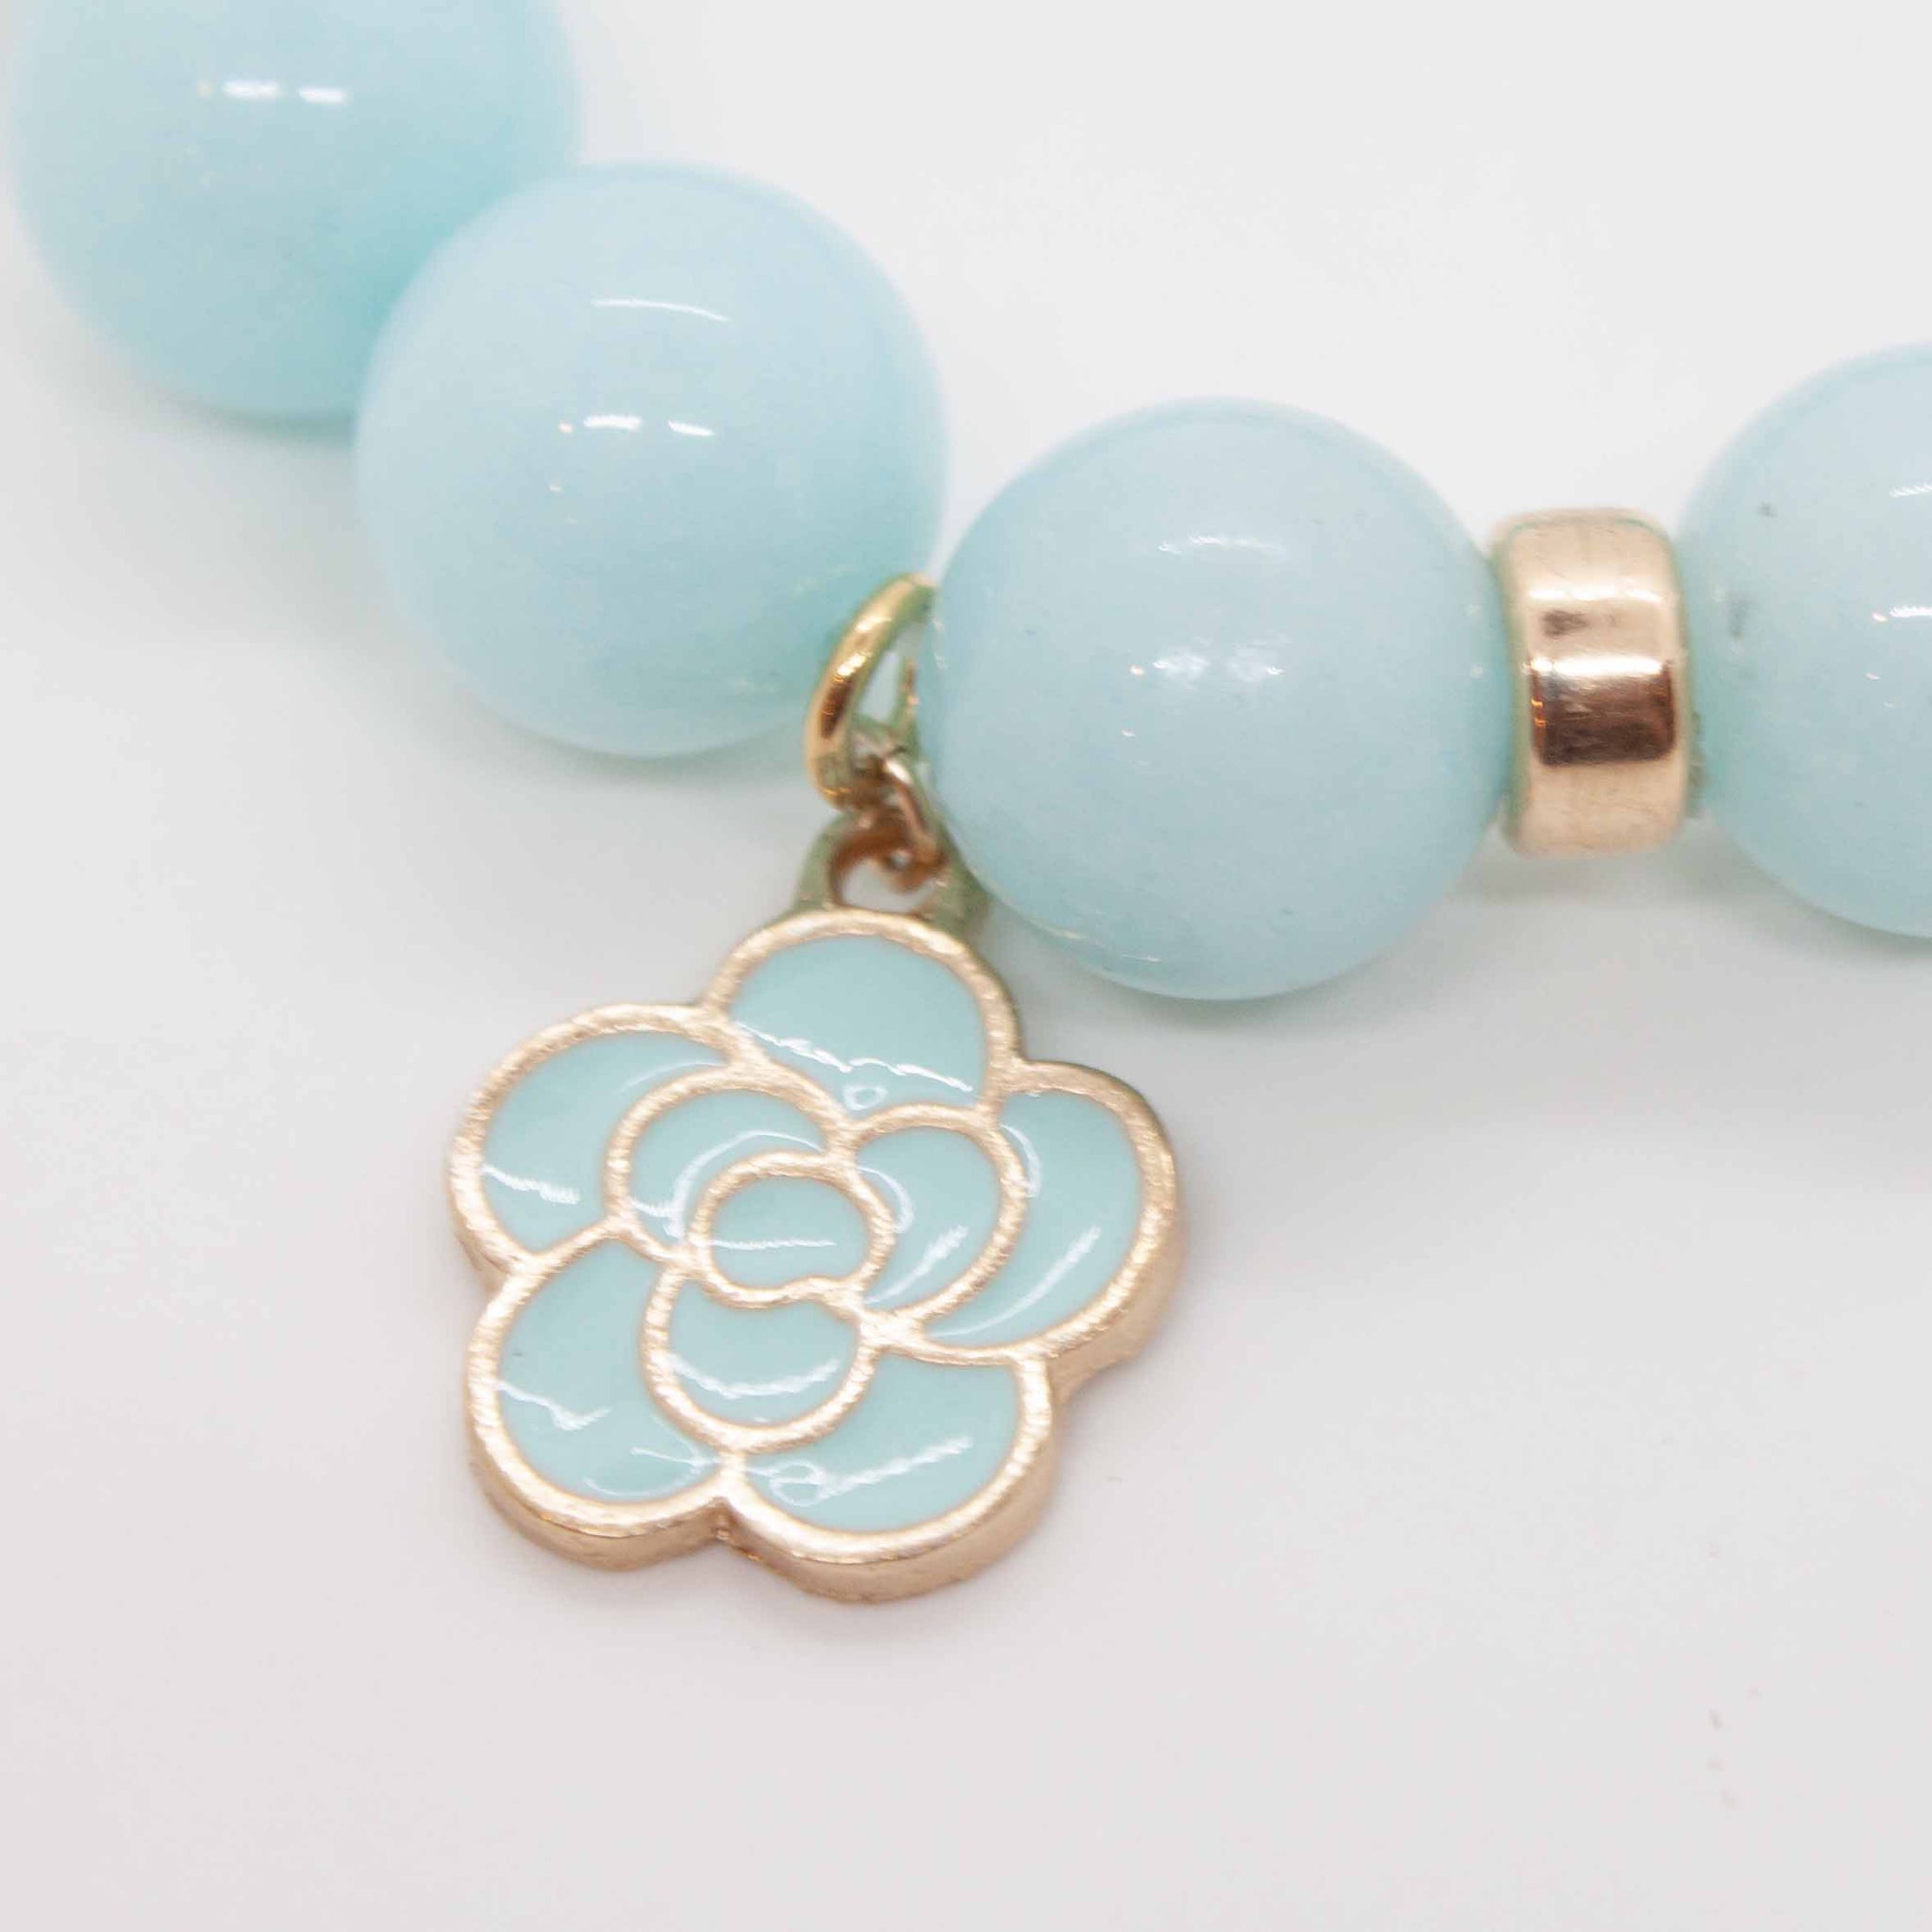 The beloved morning glory vine produces round sky blue flowers. For the gardener in your life! Or wear as a reminder of the glory of each new day.  Aqua jade beads with gold filled accents and morning glory charm. Double strung with silk elastic. Handmade in Toronto by kp jewelry co. 